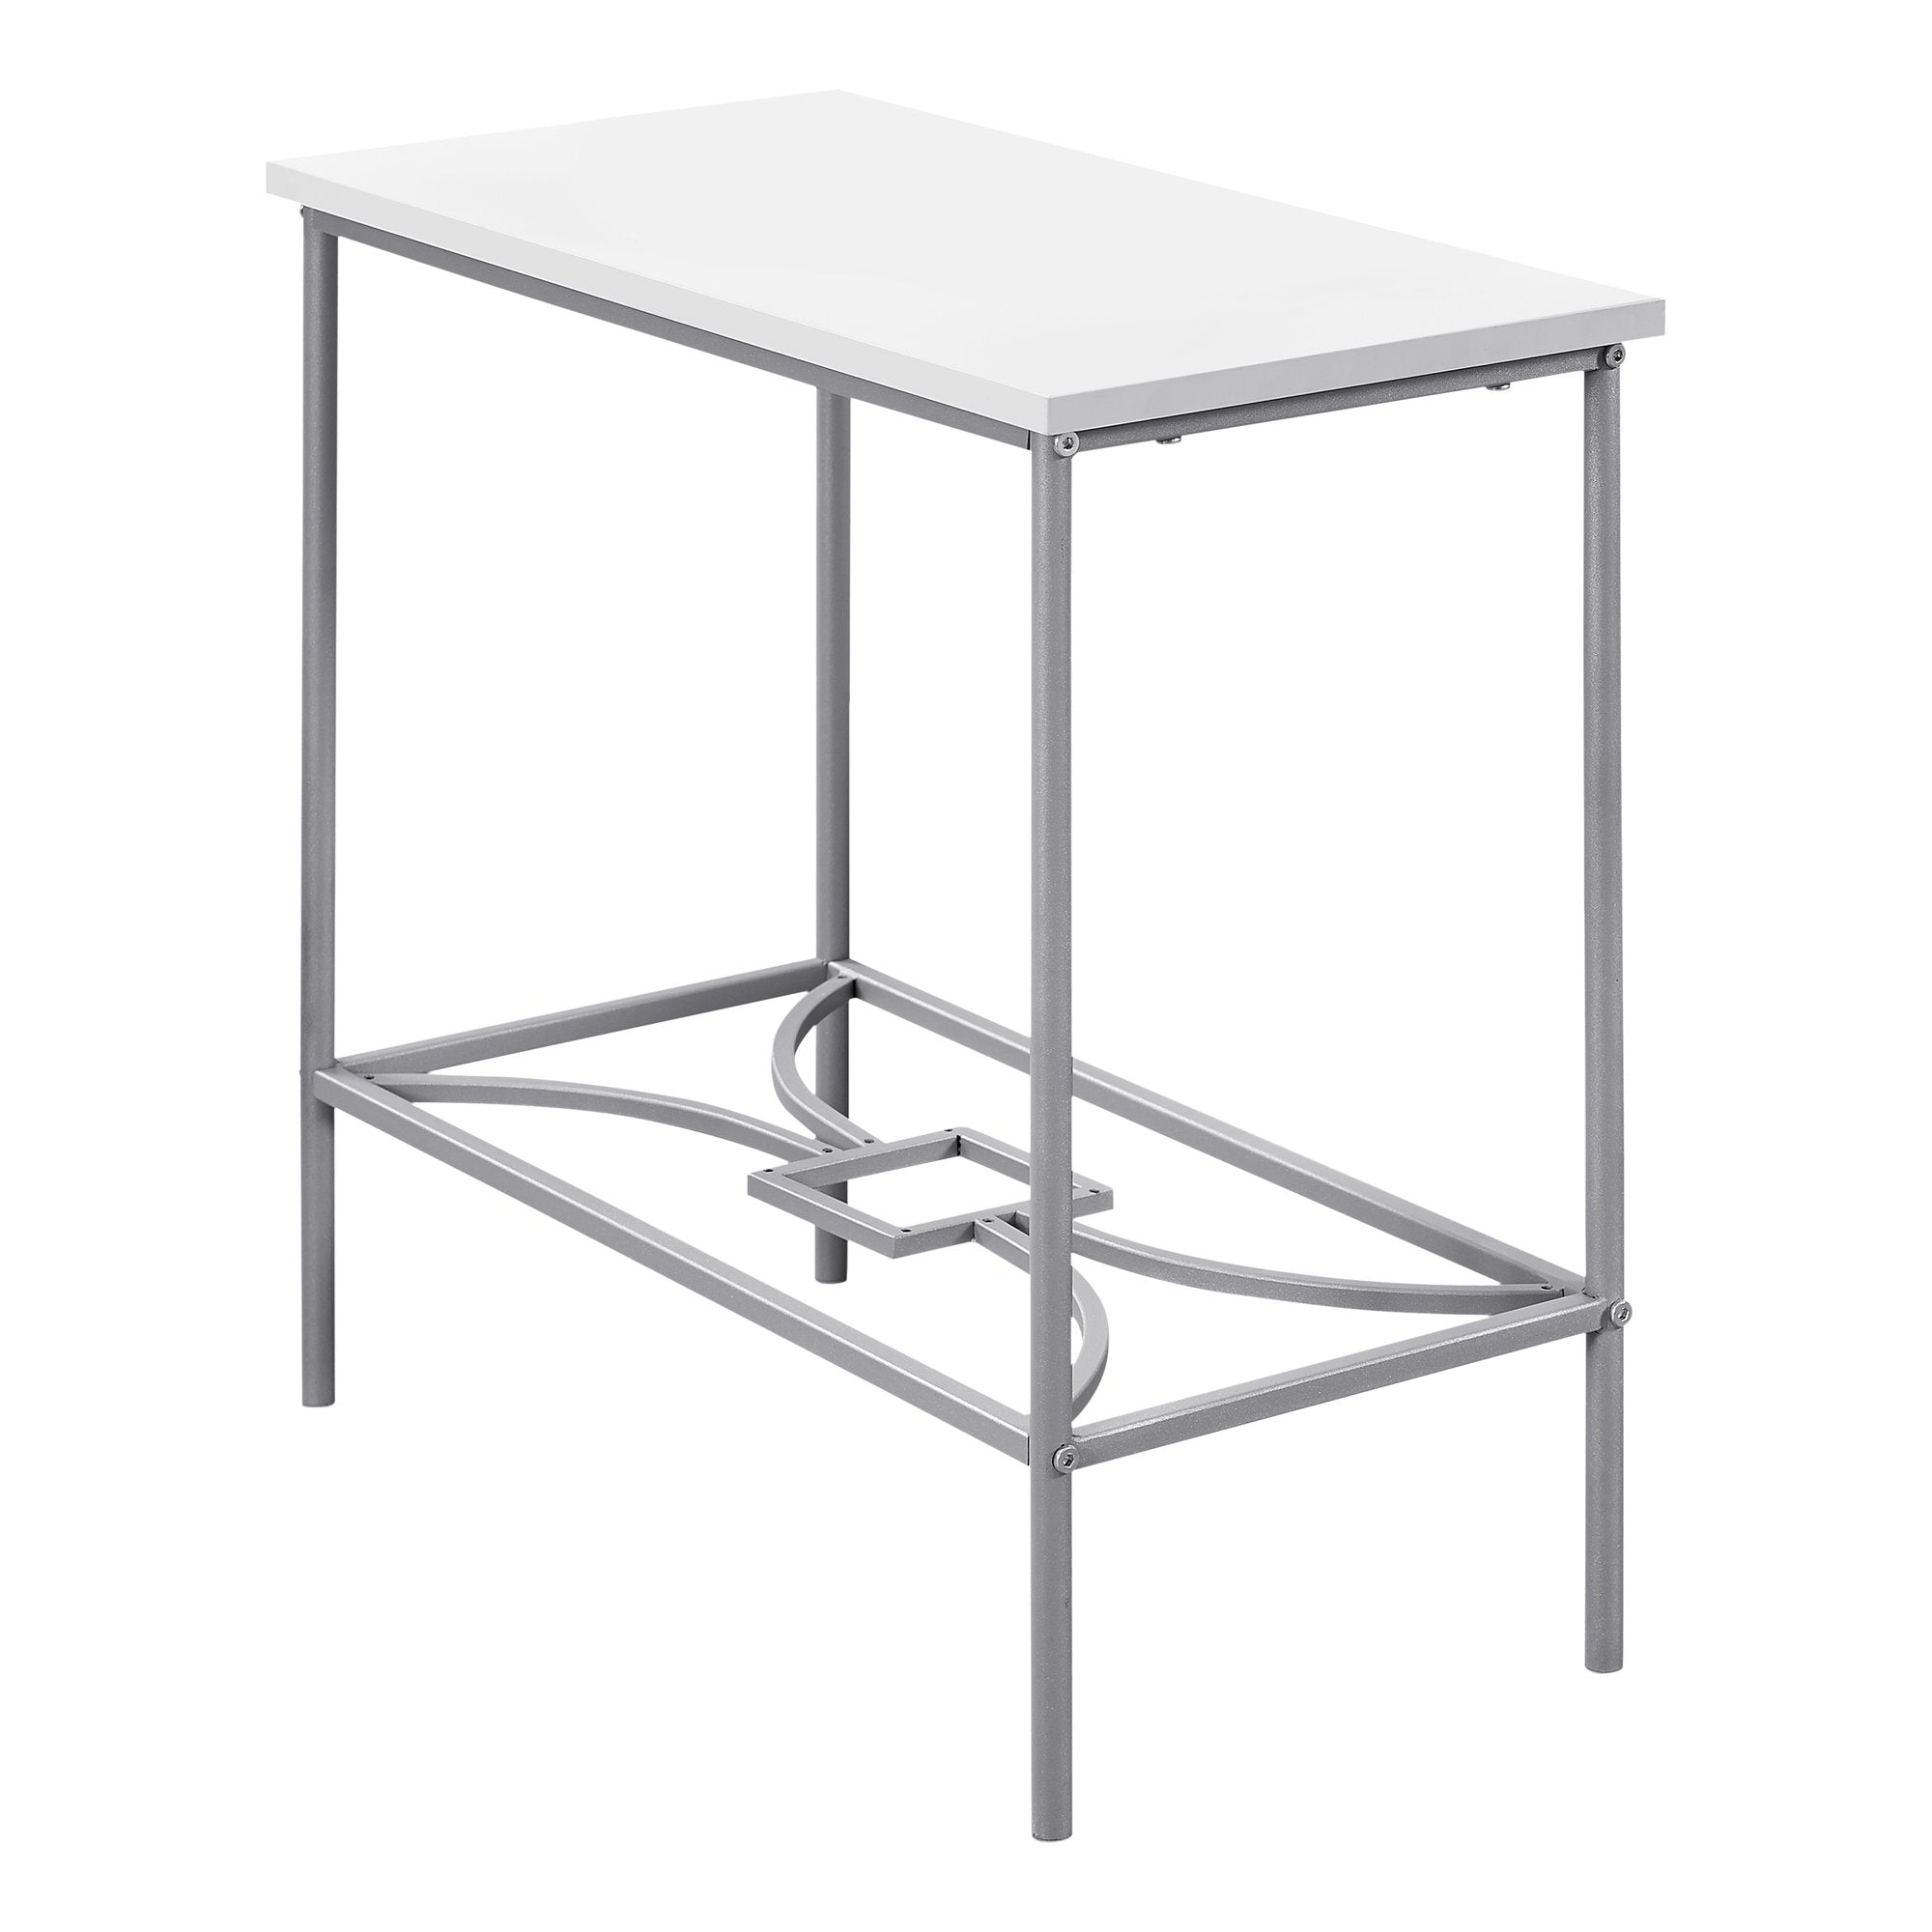 MN-842077    Accent Table, Side, End, Narrow, Small, Living Room, Bedroom, 2 Tier, Metal Legs, Laminate, White, Grey, Contemporary, Modern